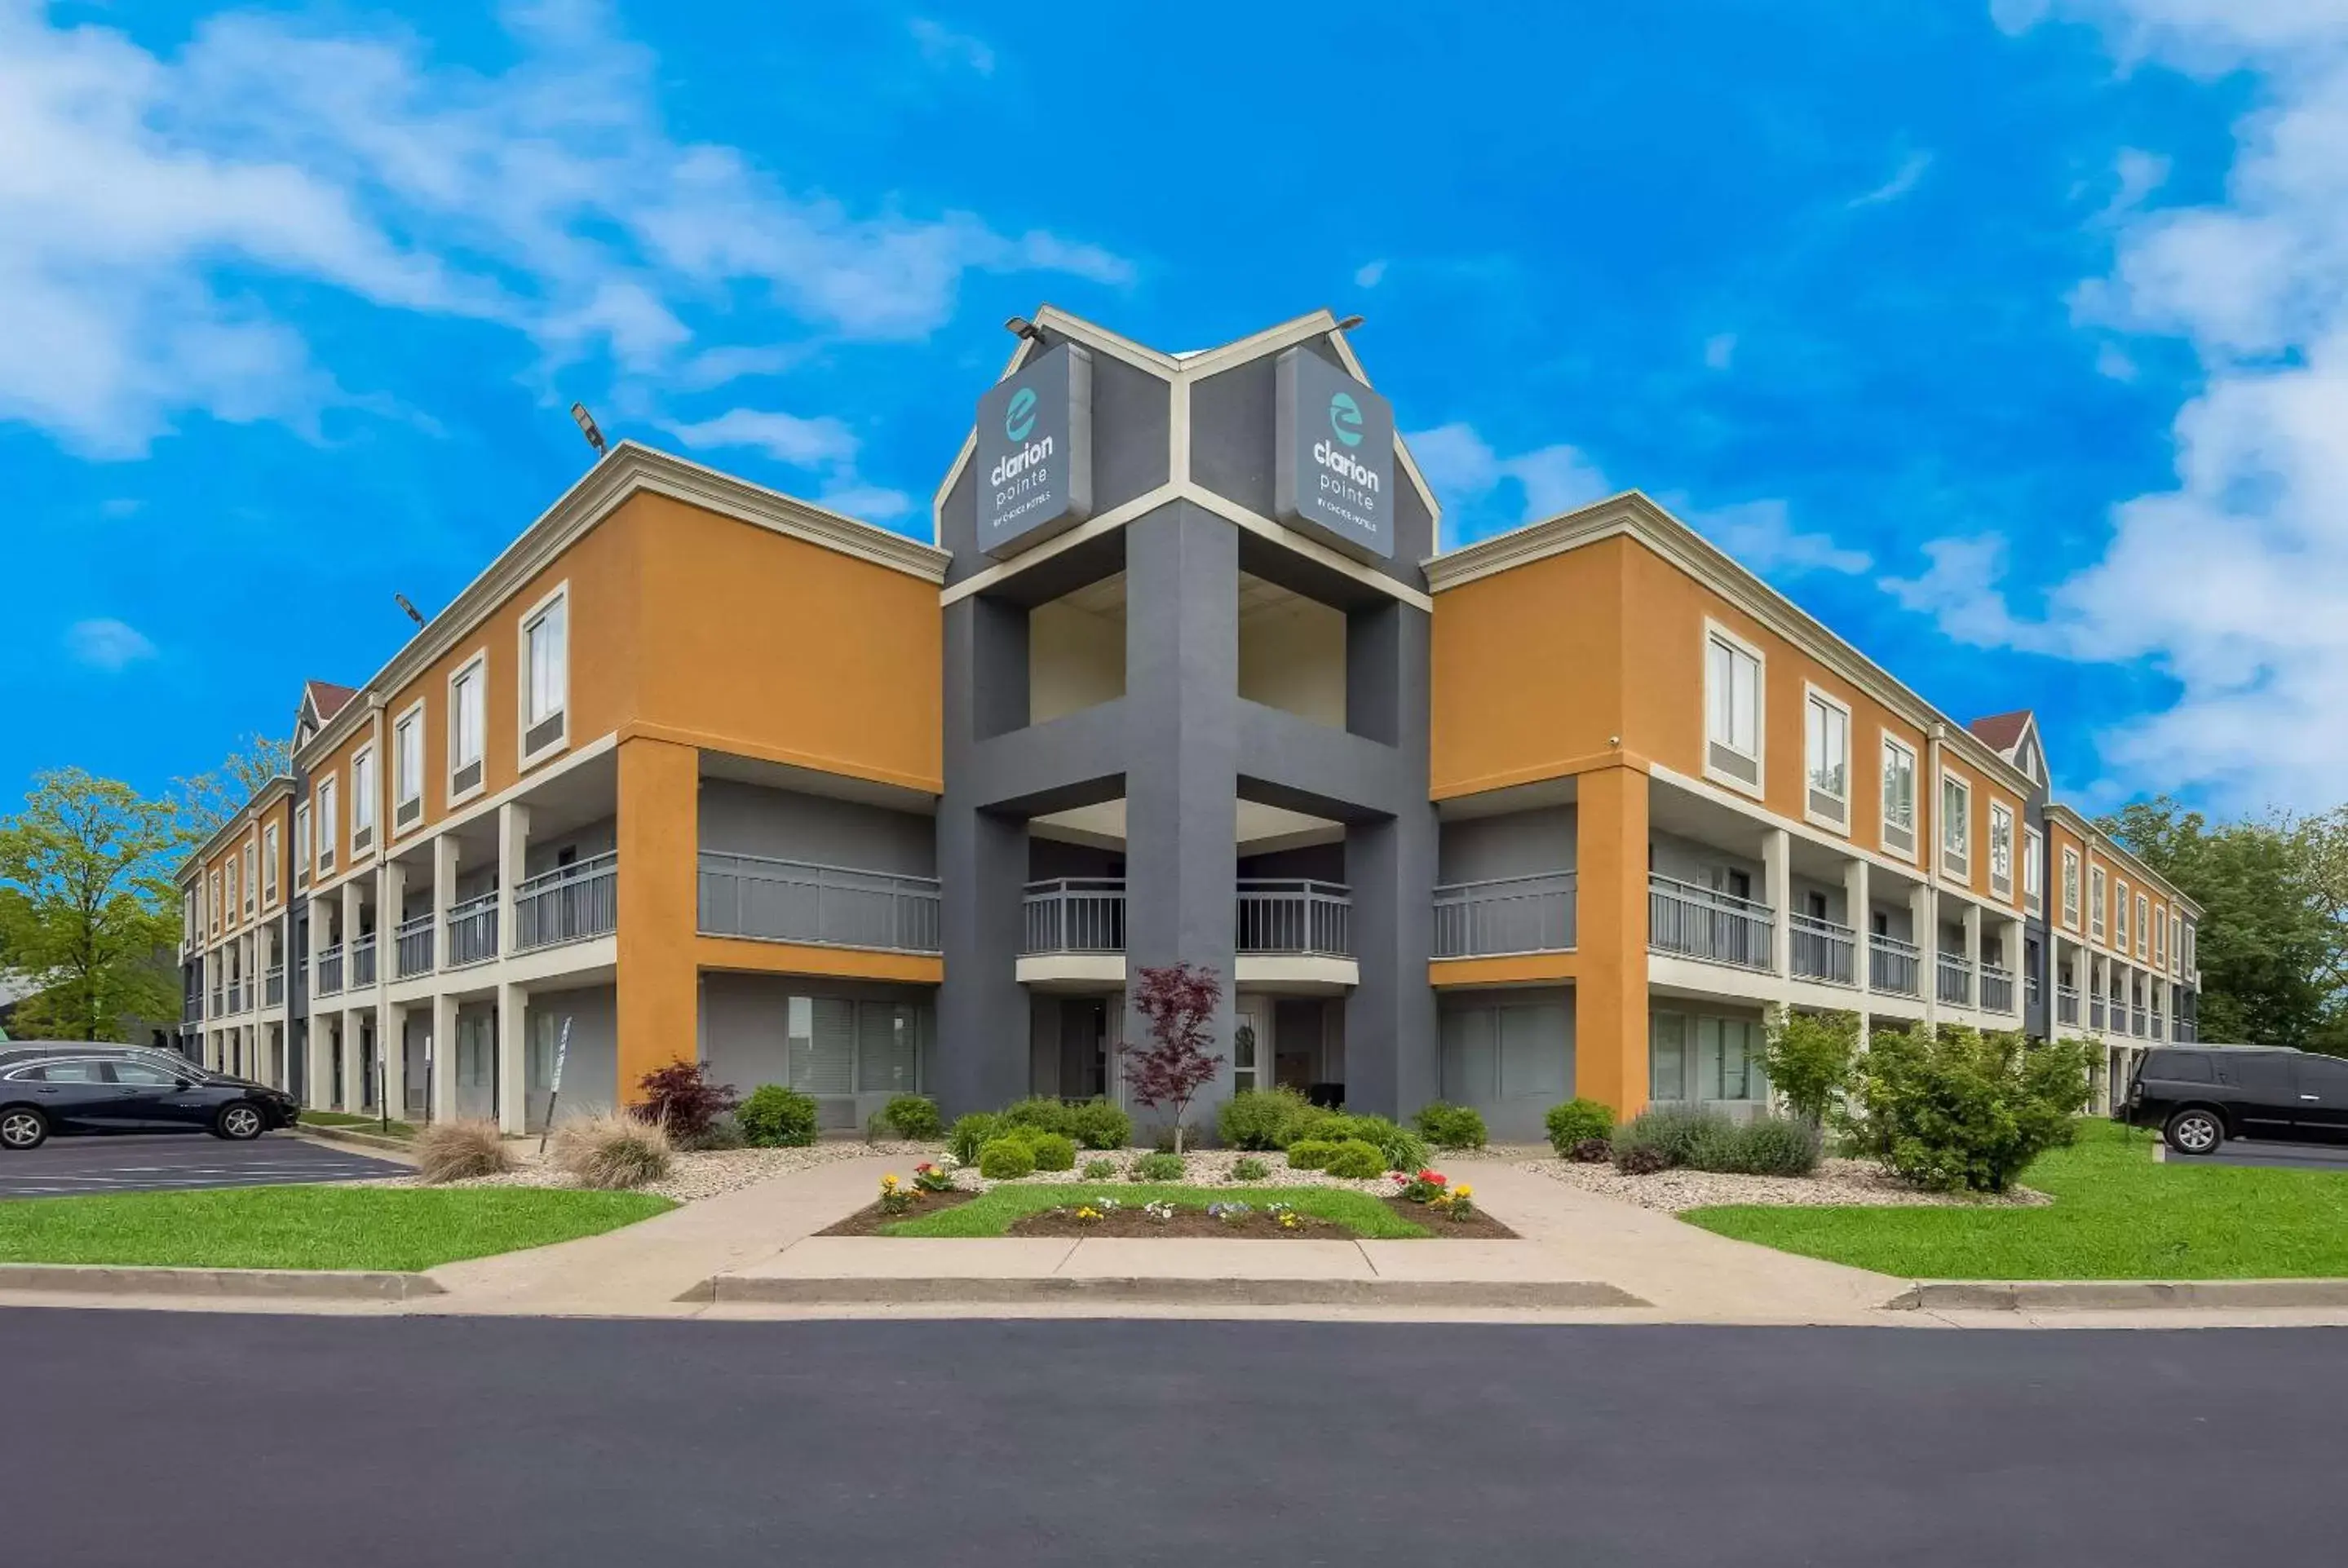 Property Building in Clarion Pointe Indianapolis Northeast